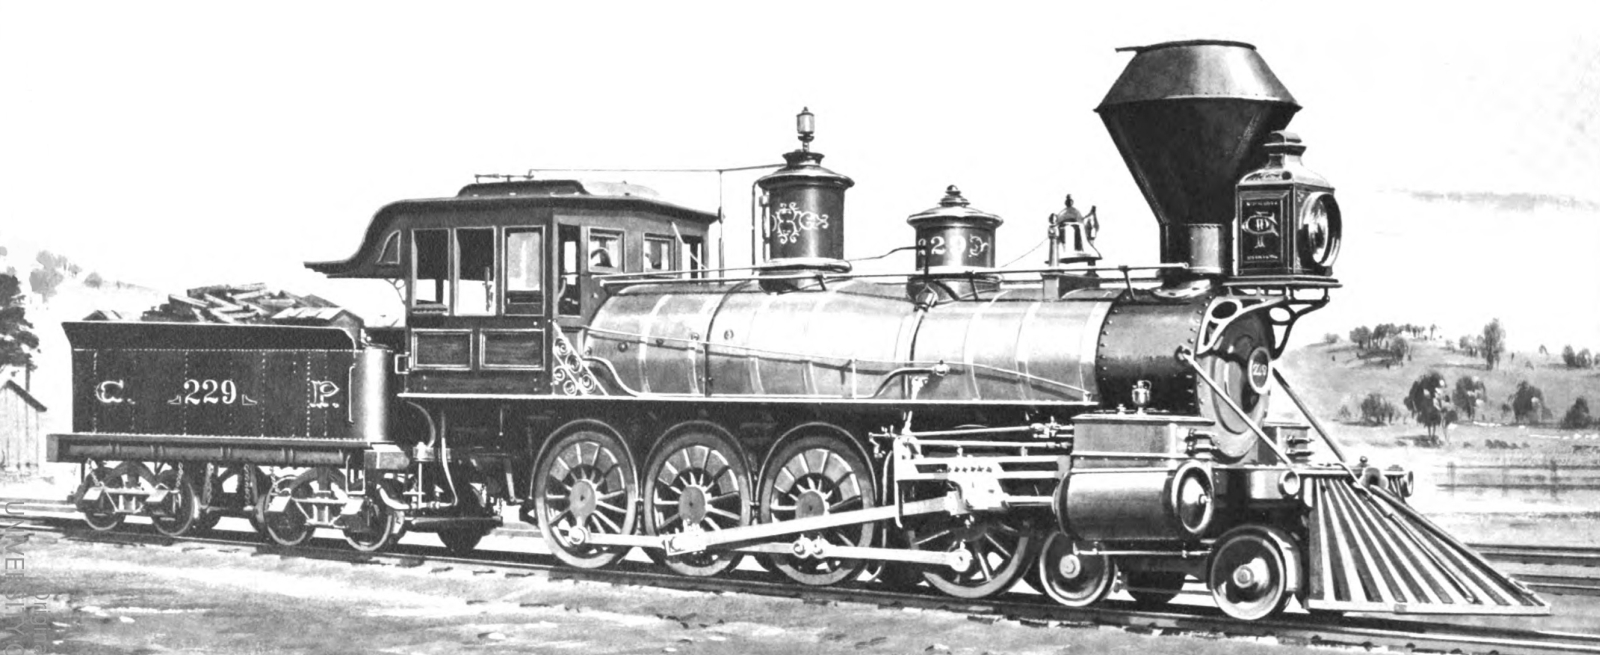 Drawing of the locomotive in its original condition by Richard Ward